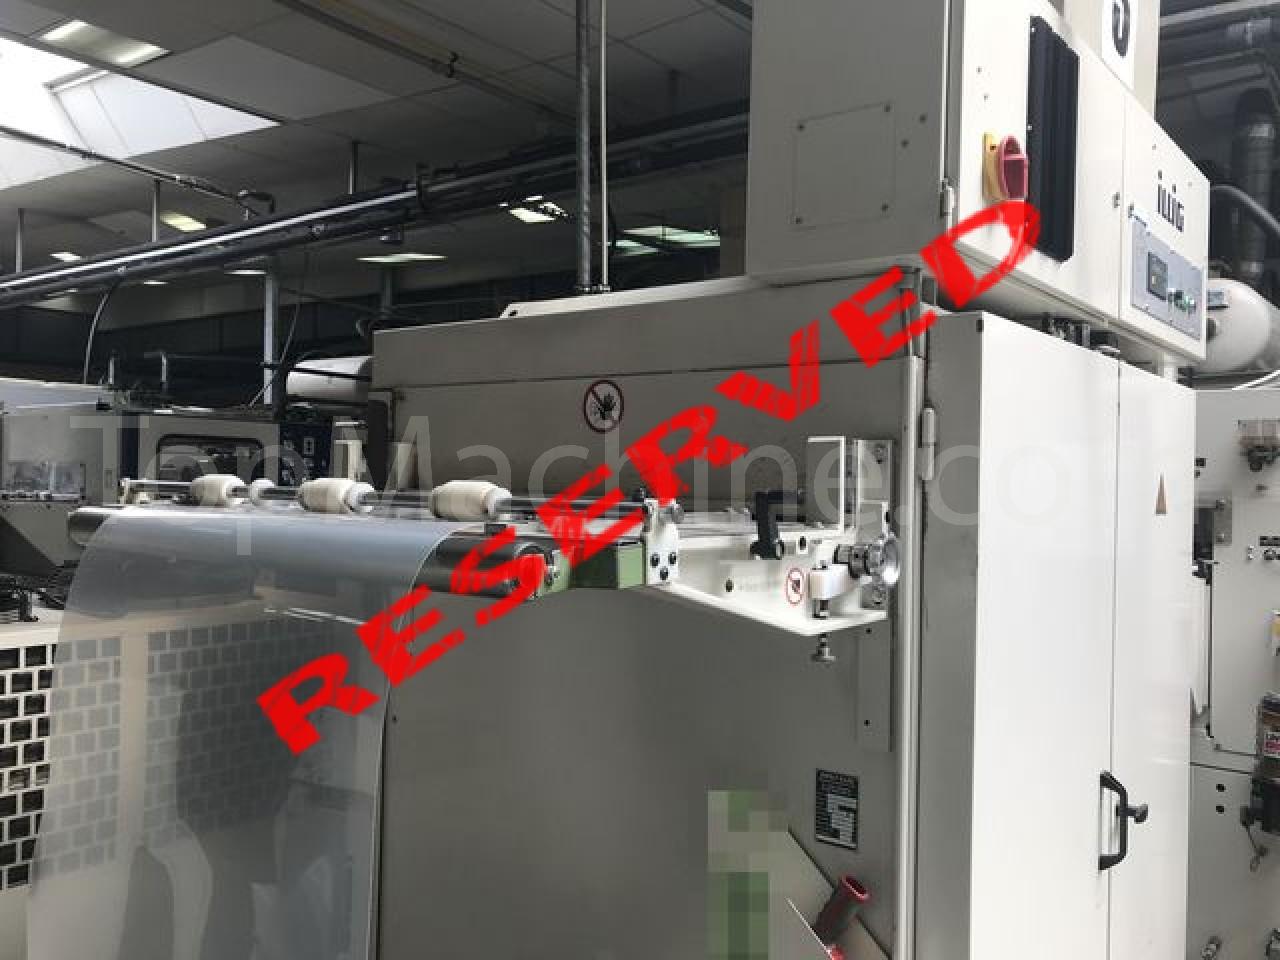 Used Illig RDM 70K Thermoformage & feuilles Thermoformeuse